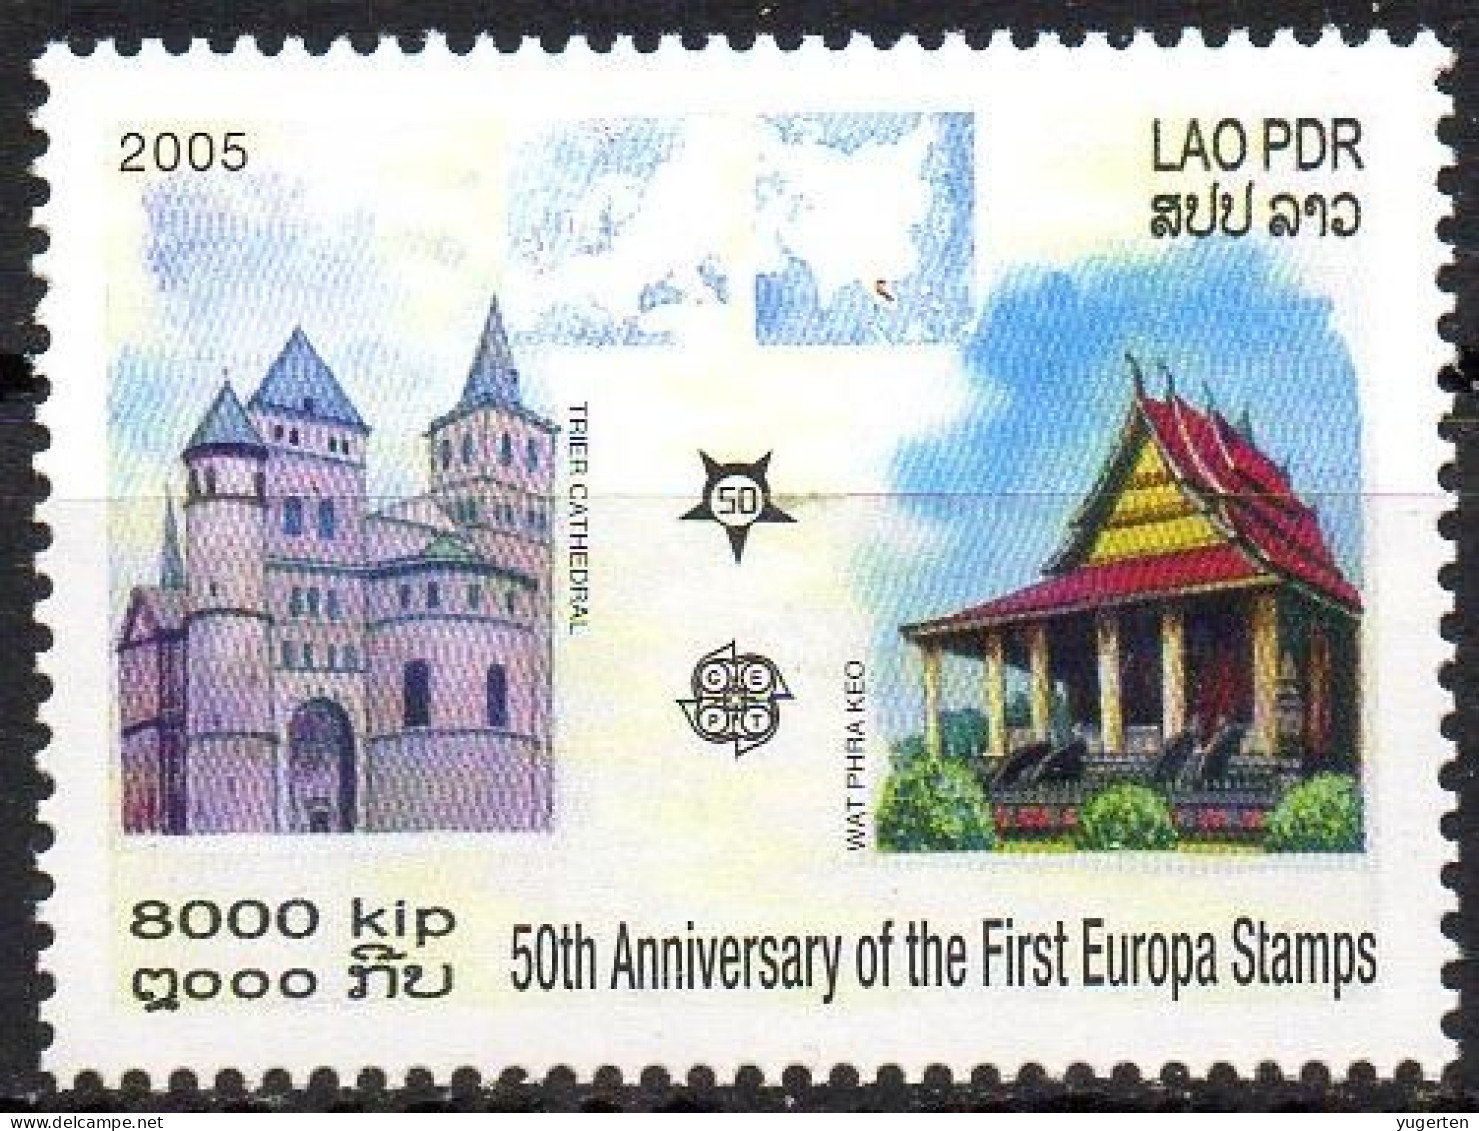 LAOS 2005 - 1v - MNH - The 50 Years Anniv. Of The First EUROPA Stamps - Chateau - Architecture Castle Castillo Schloss - Joint Issues